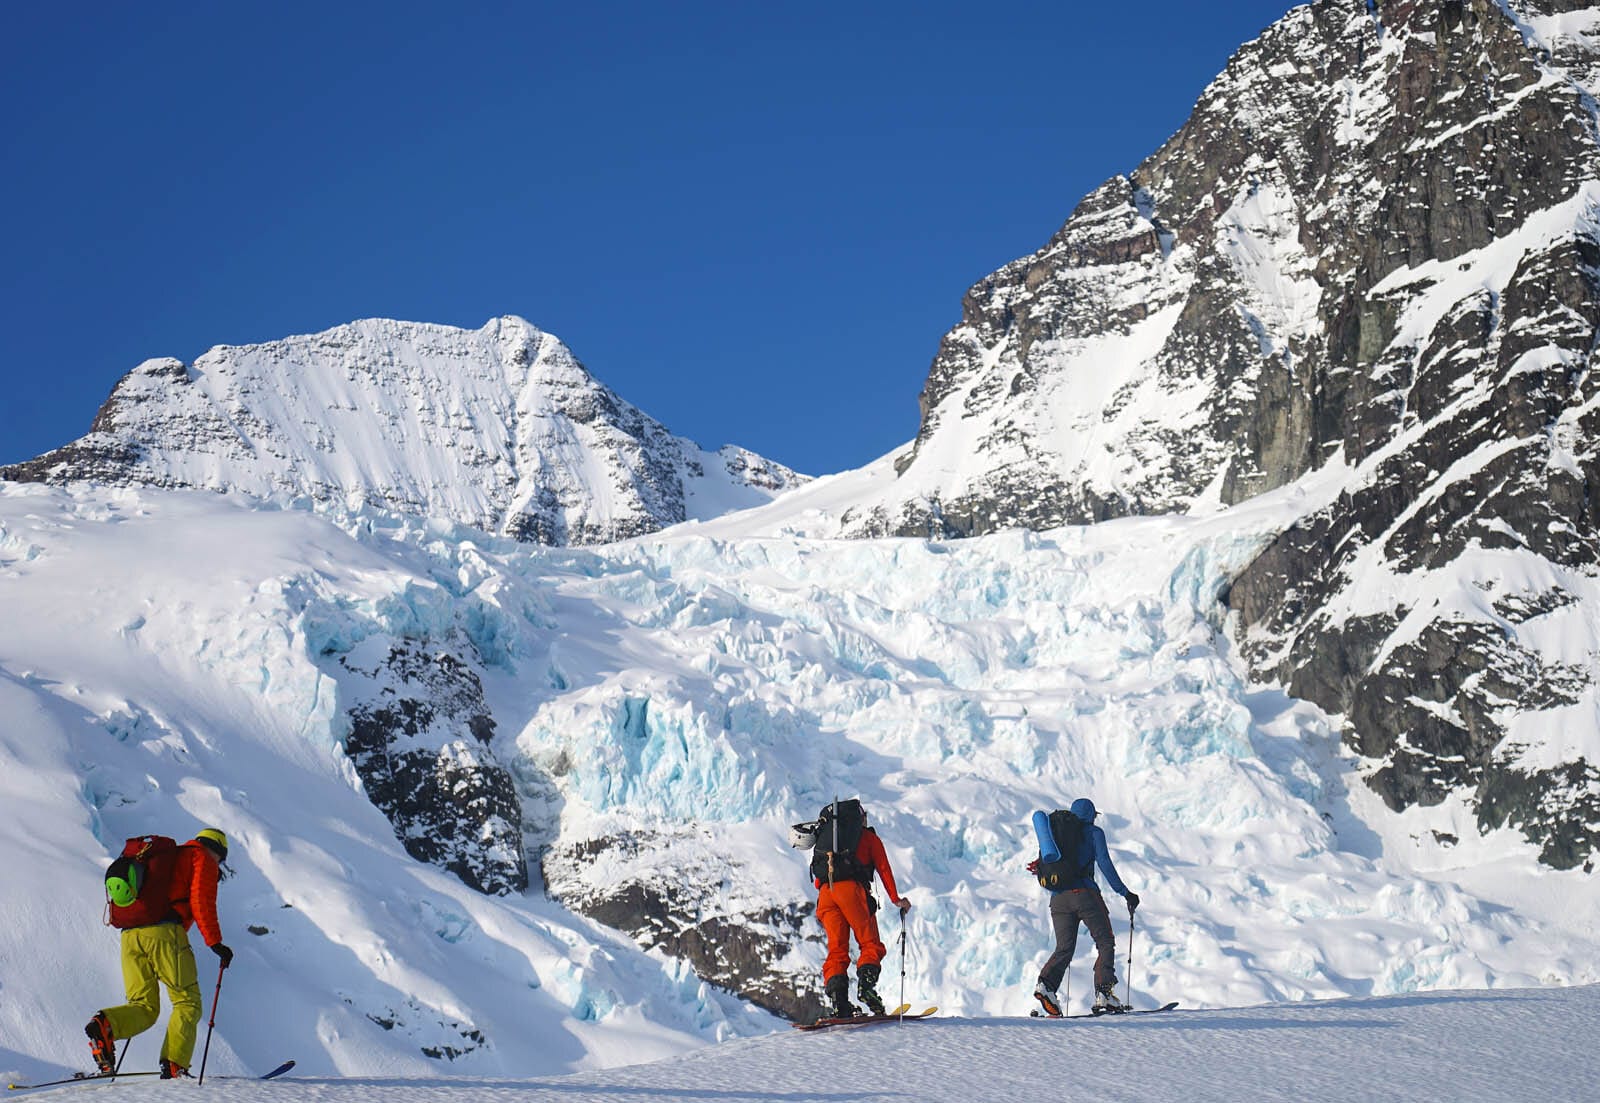 Jan 23-30, 2019 Lee Lau and his friends booked a week with us at Burnie Glacier Chalet at the end of March. We had exceptional spring conditions and enjoyed some incredible tours up in the high glaciers.